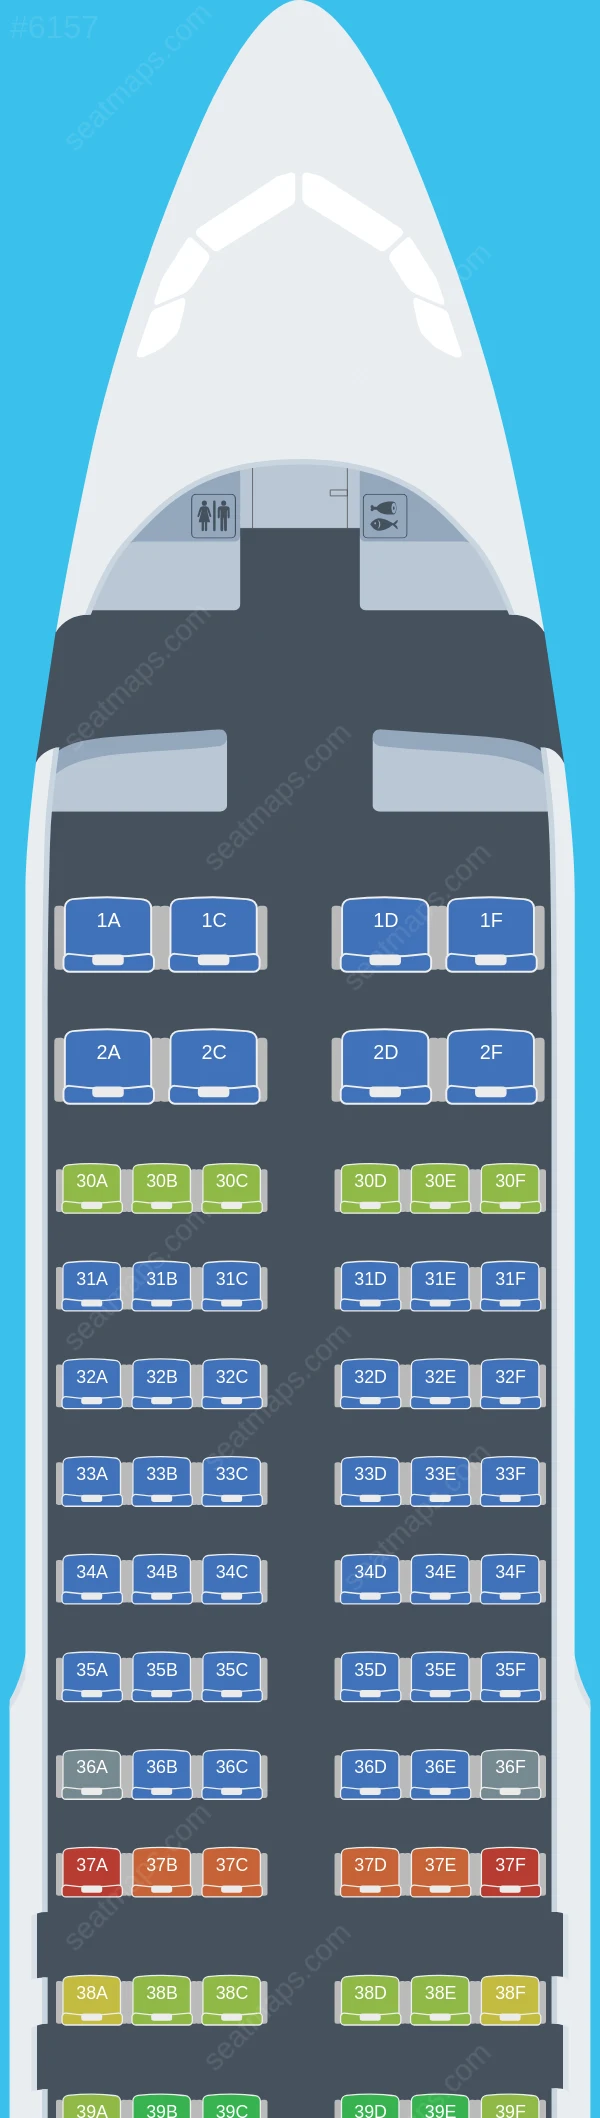 Sichuan Airlines Airbus A320-200 seatmap preview